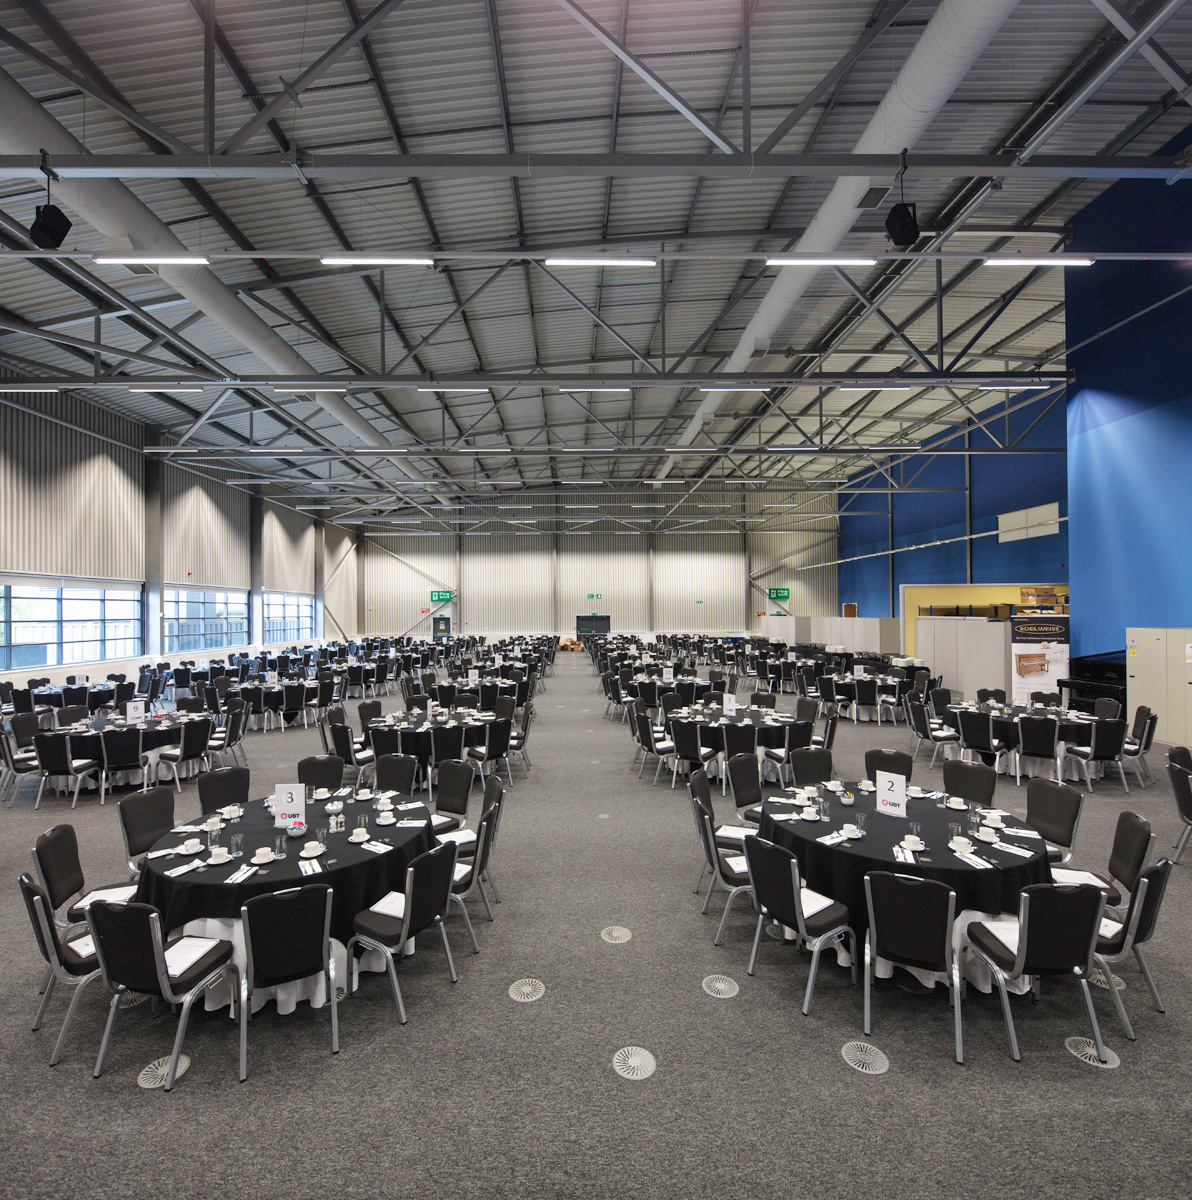 Tables set for conference and seminar in large room